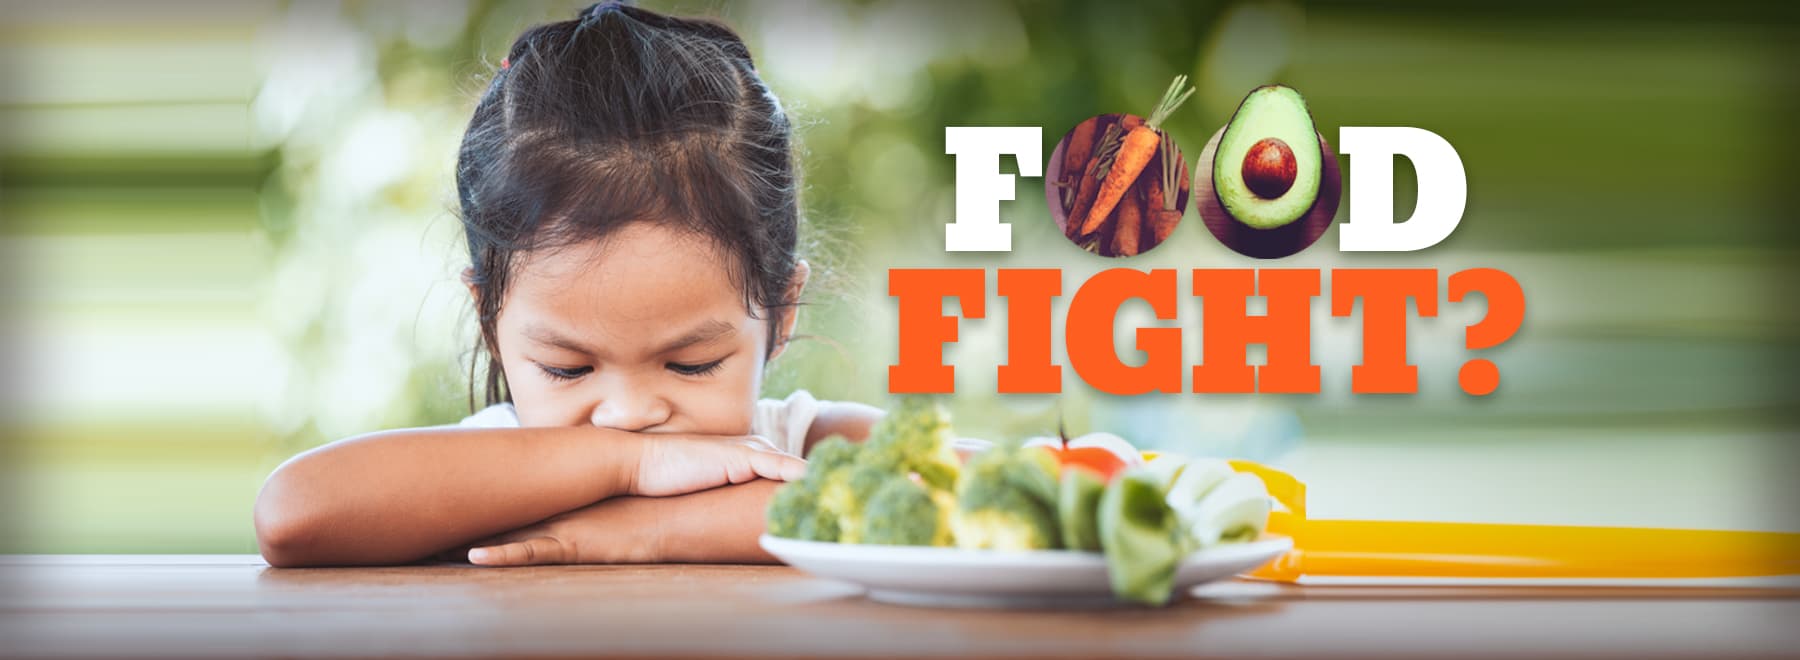 Female asian child refusing to eat her food with the title Food Fight? displayed